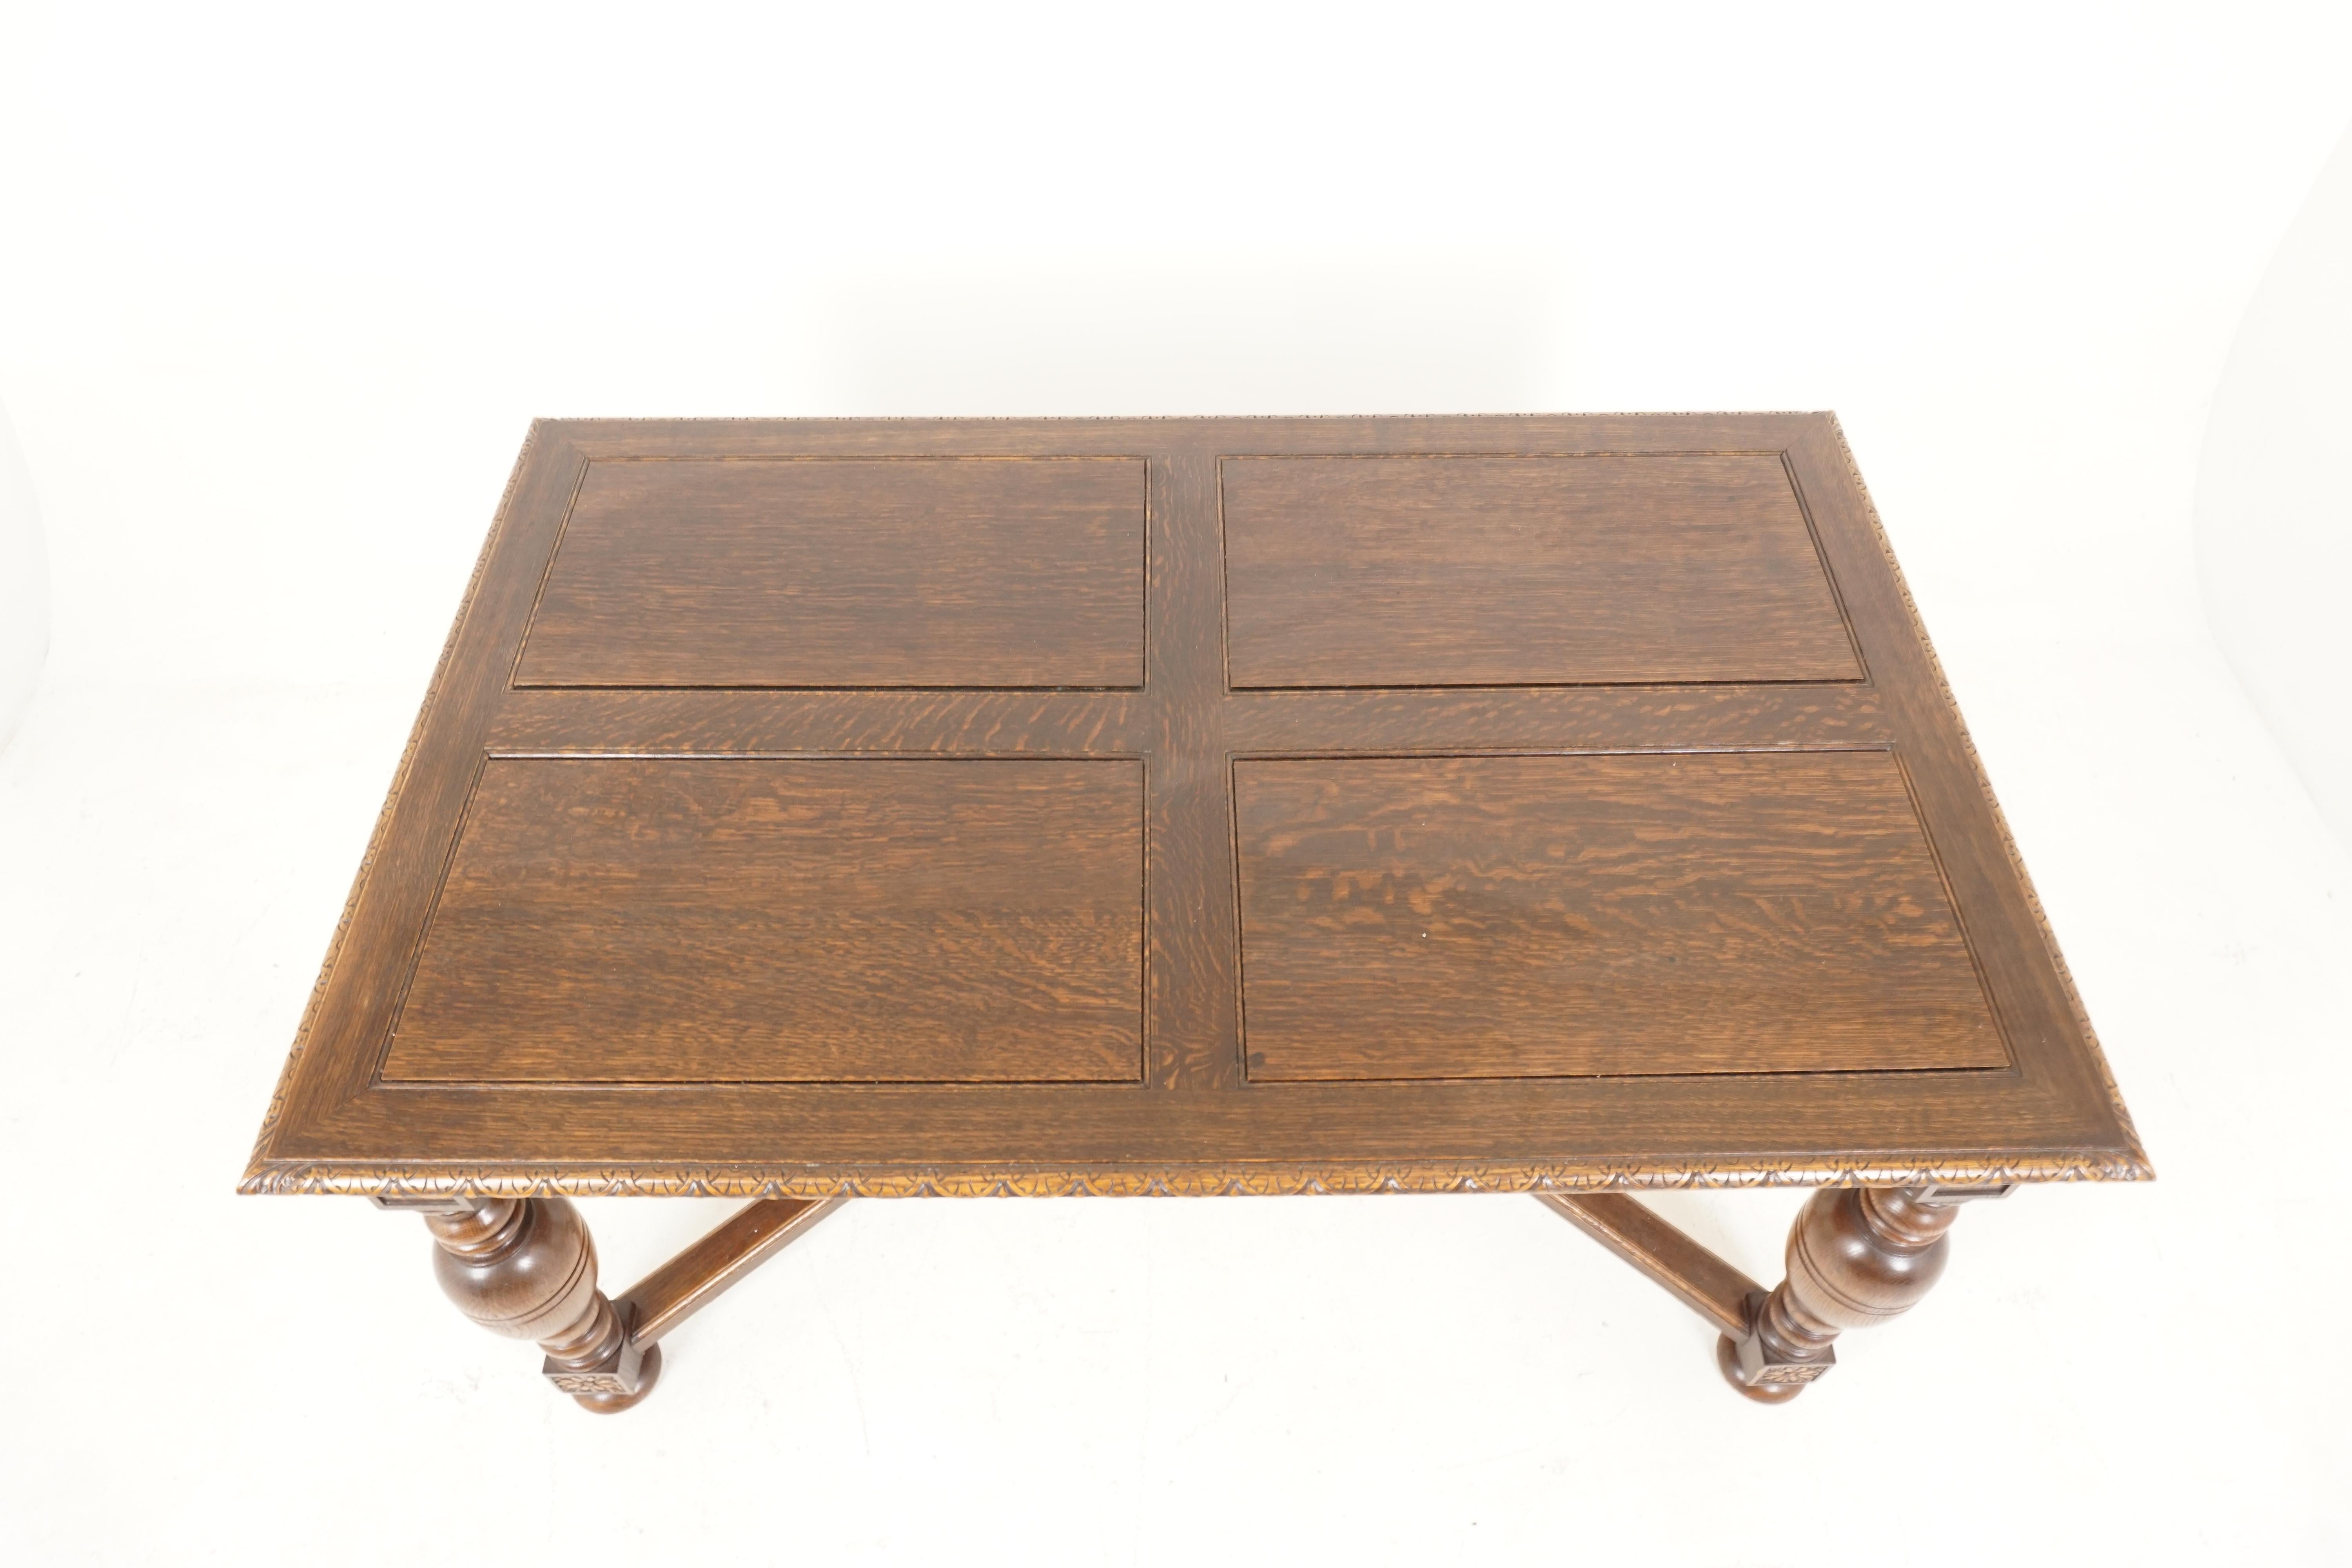 Hand-Crafted Antique Refectory Table, Tiger Oak, Draw Leaf Table, Dining Table, Scotland 1930